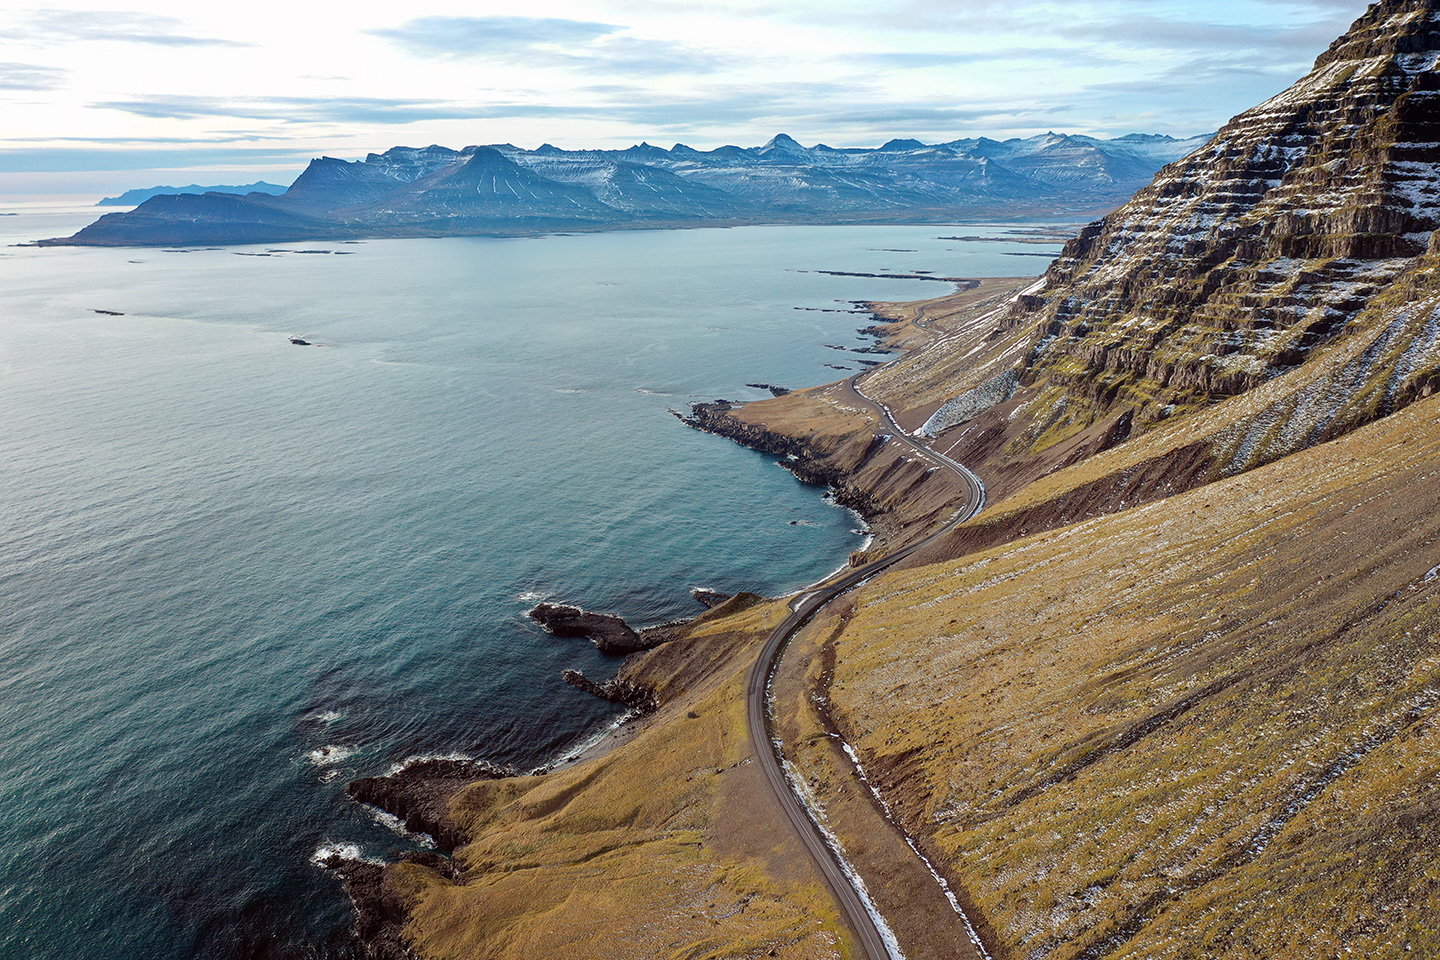 The birds point of view overlooking the road to Breiðdalsvík